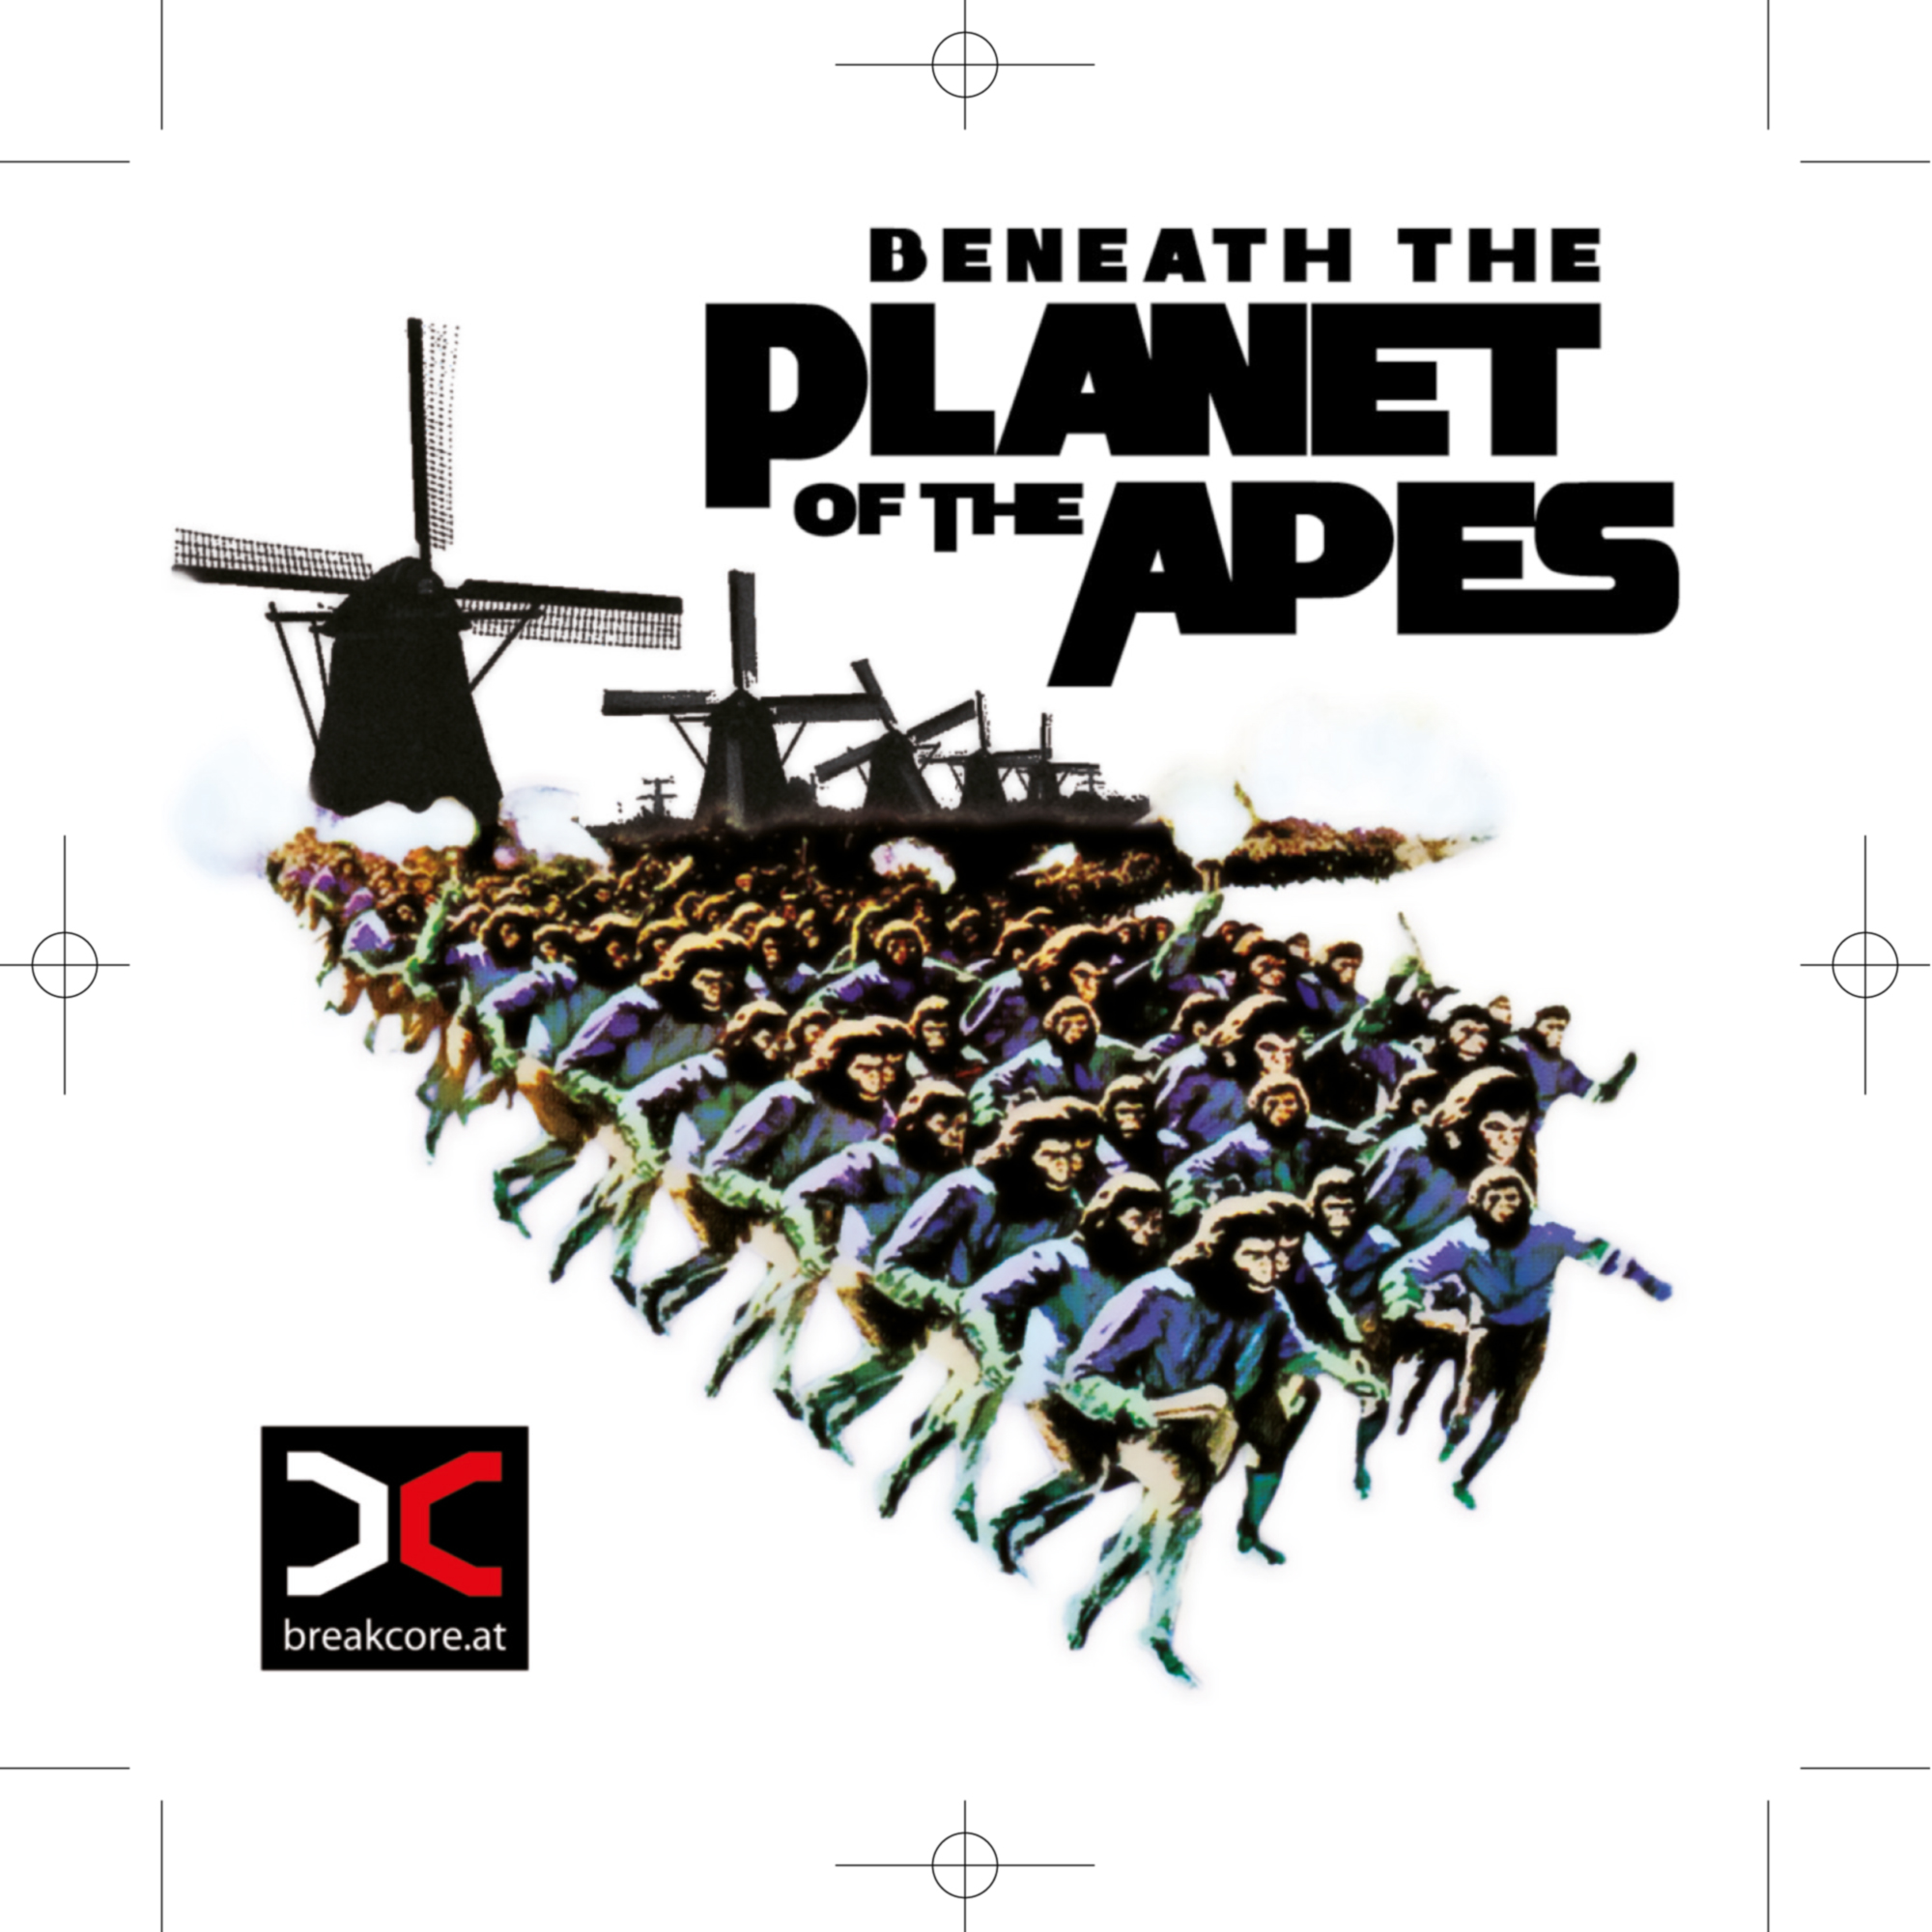 Planet of the Apes NL Flyer